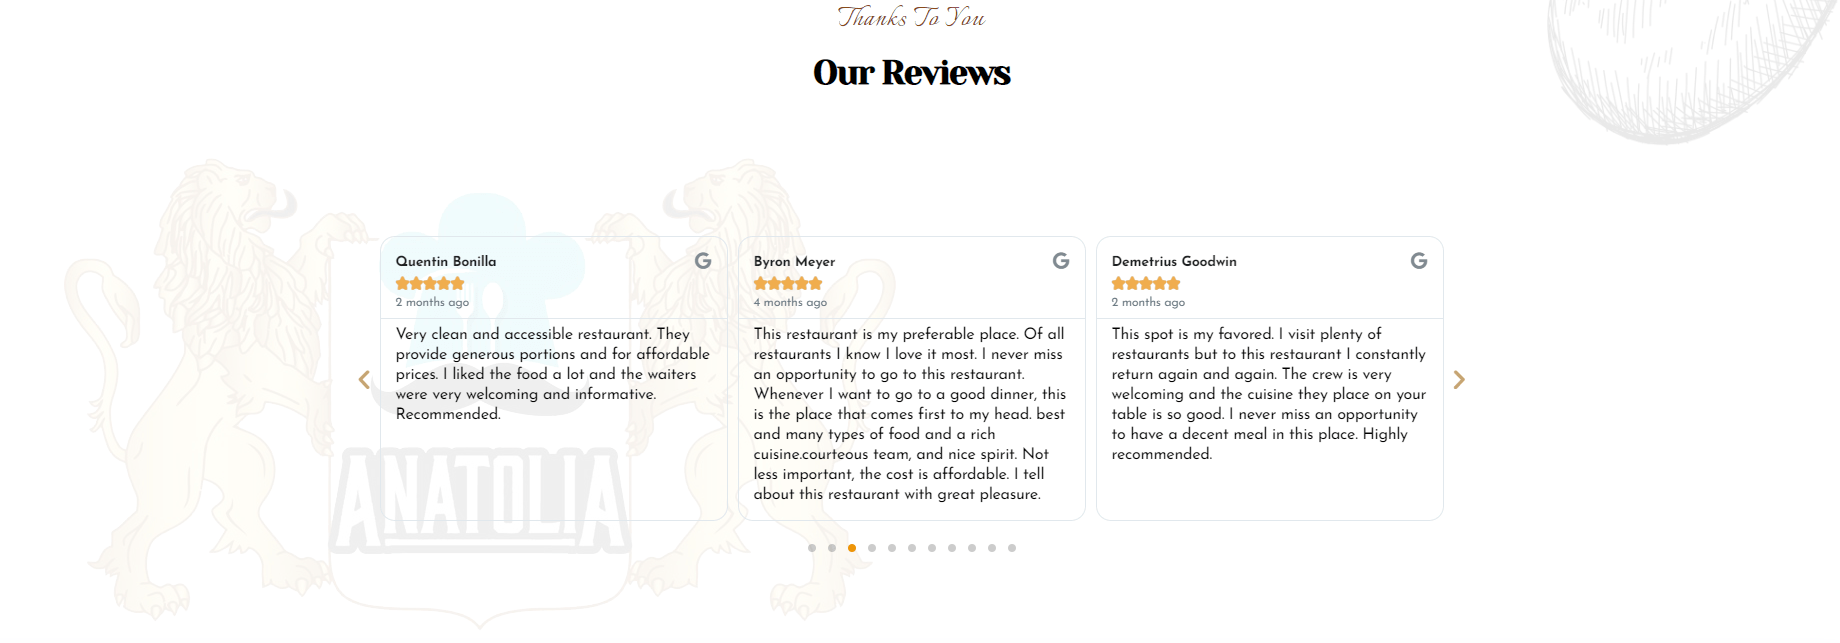 our-reviews